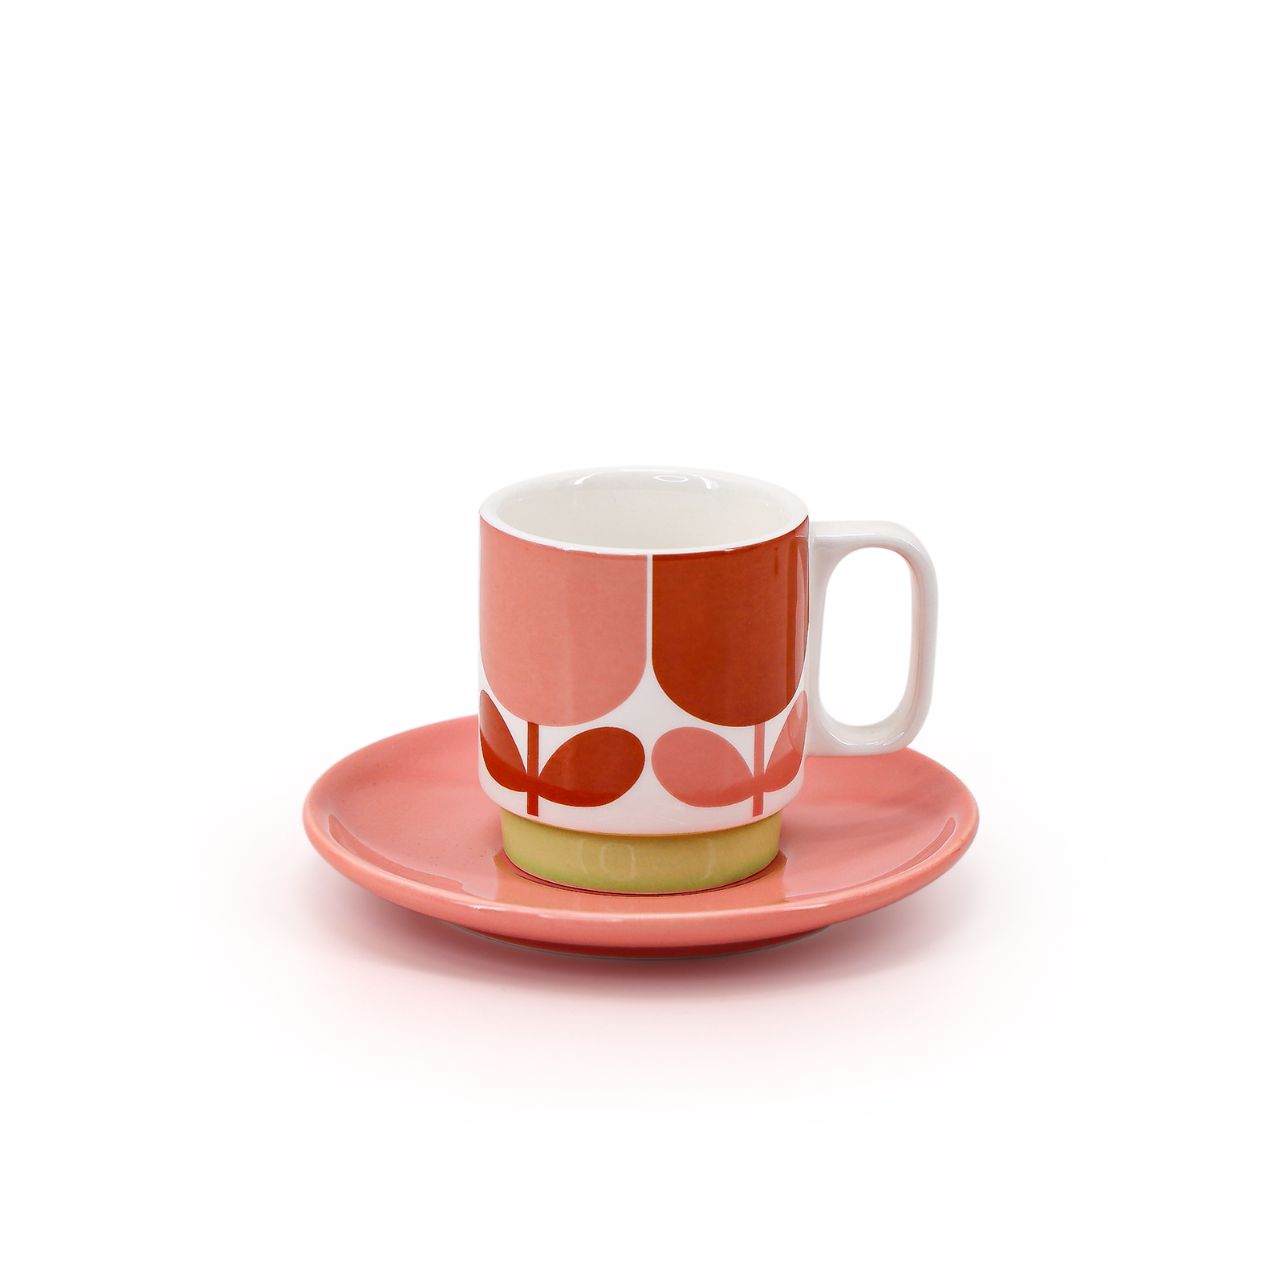 Orla Kiely Set 2 Espresso Cup & Saucer - Block Flower DESIGNED IN THE UK BY ORLA KIELY: This set of two espresso cup and saucer has a unique 'Block Flower' print.  Each cup is stamped with an authentic Orla Kiely logo.